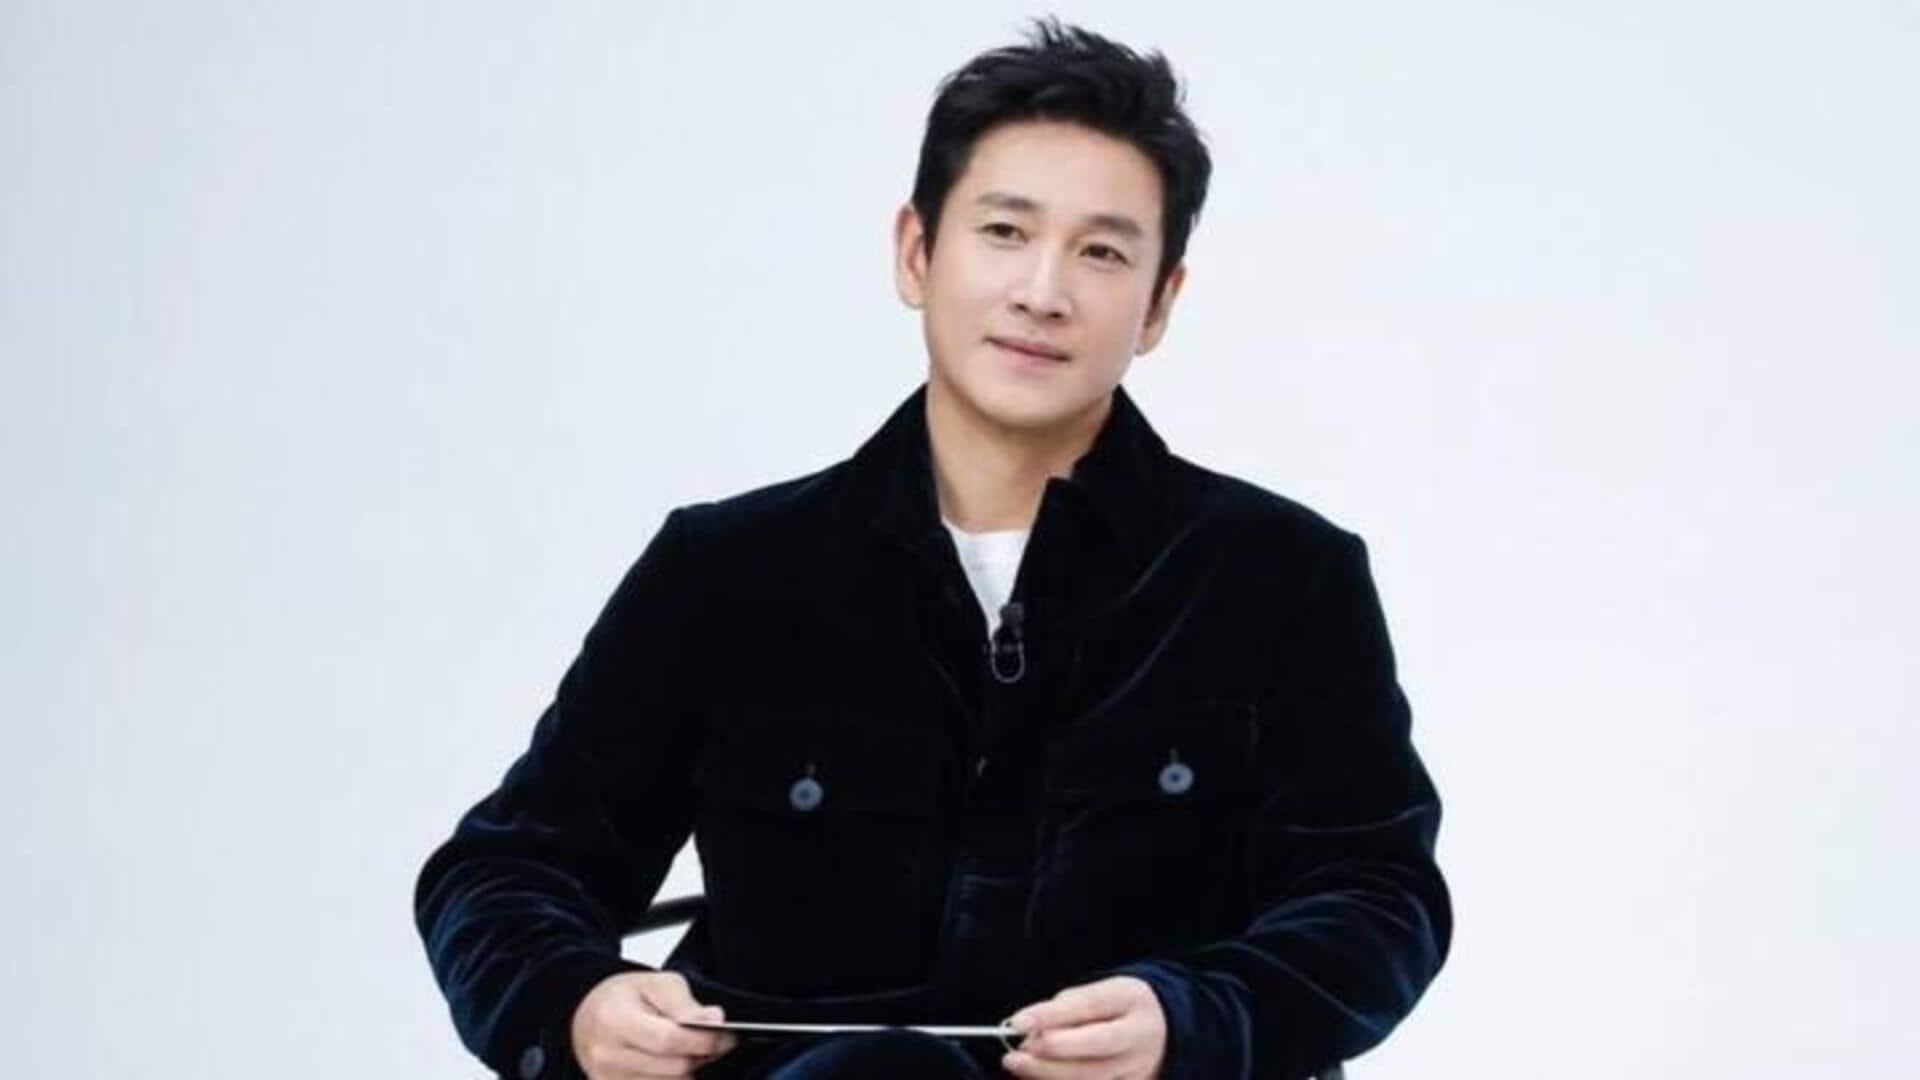 Lee Sun-kyun's agency opts for legal action against misinformation